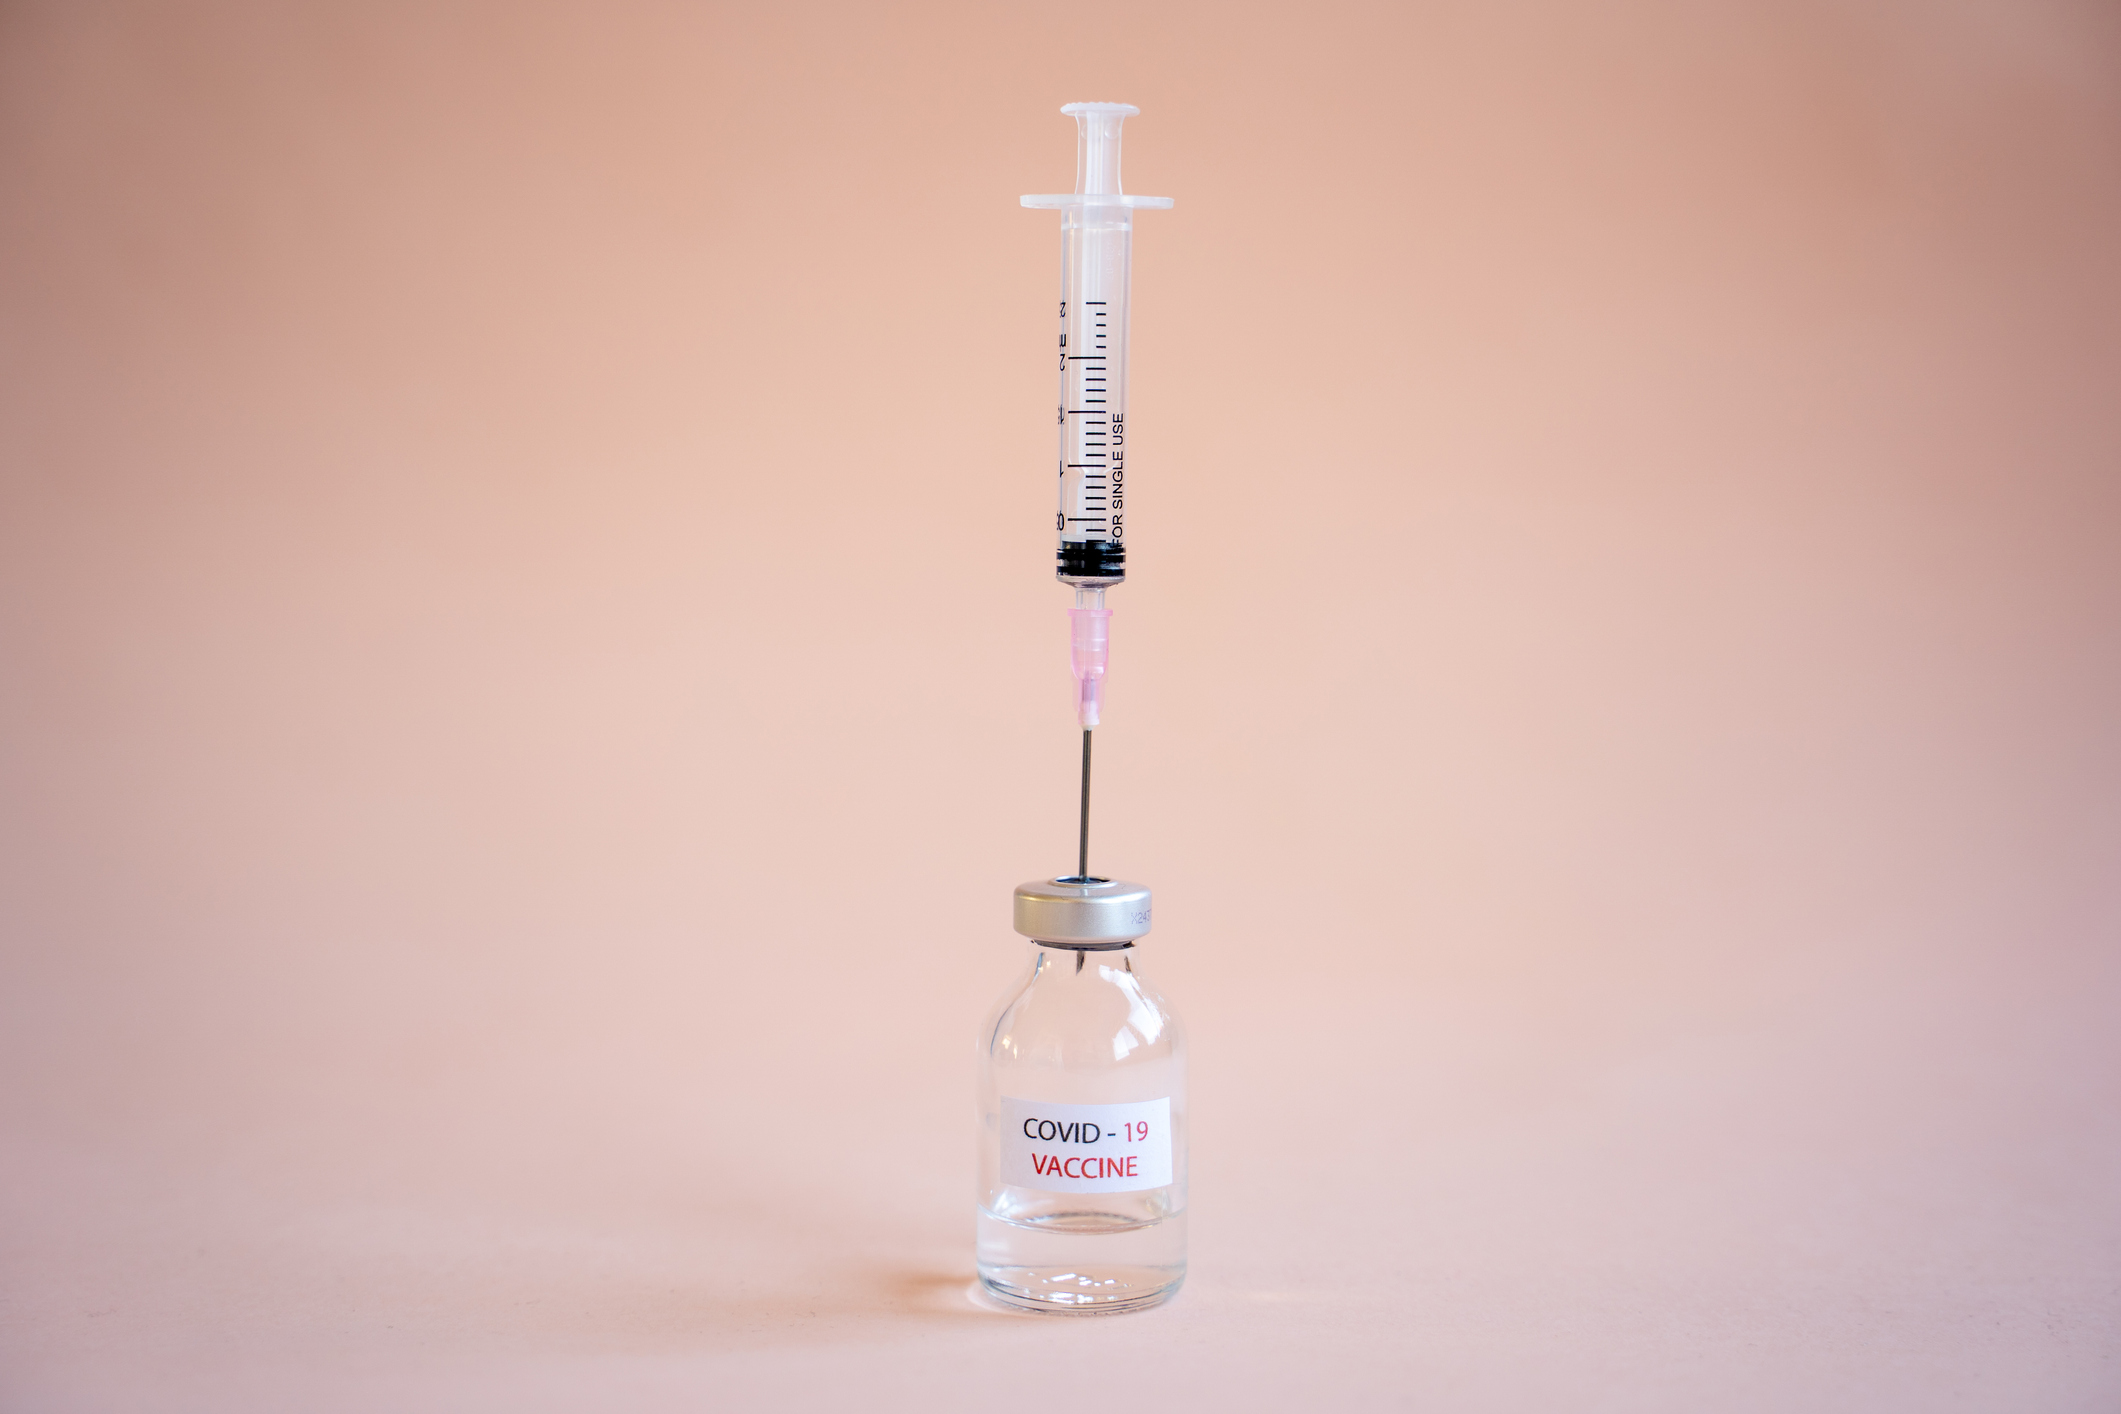 New COVID-19 Vaccine on pink background